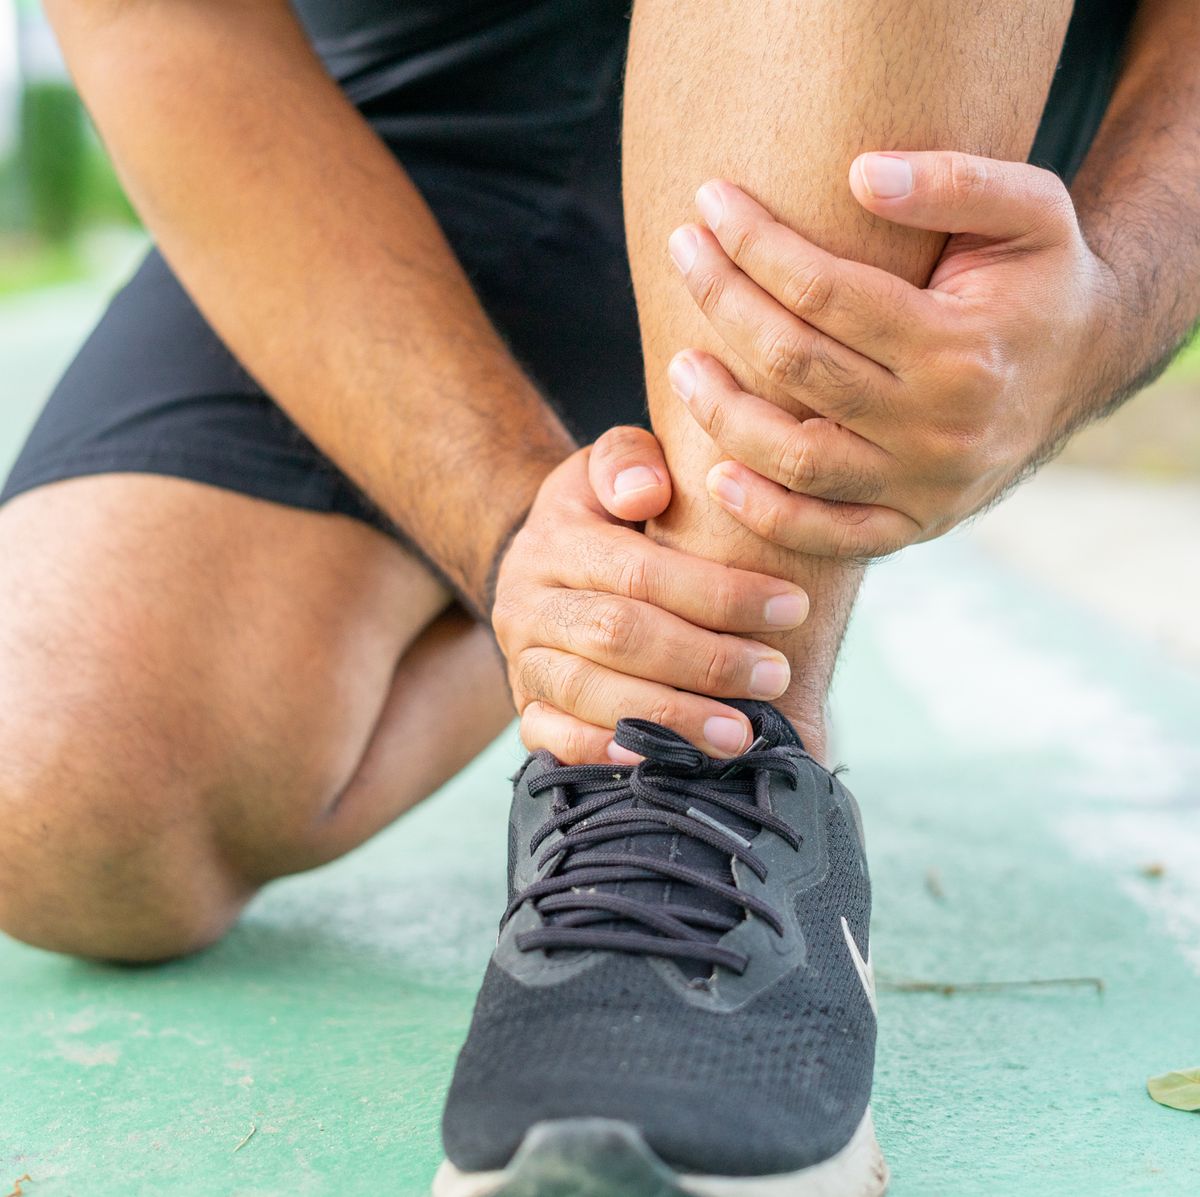 5 Exercises to Reduce Ankle Pain